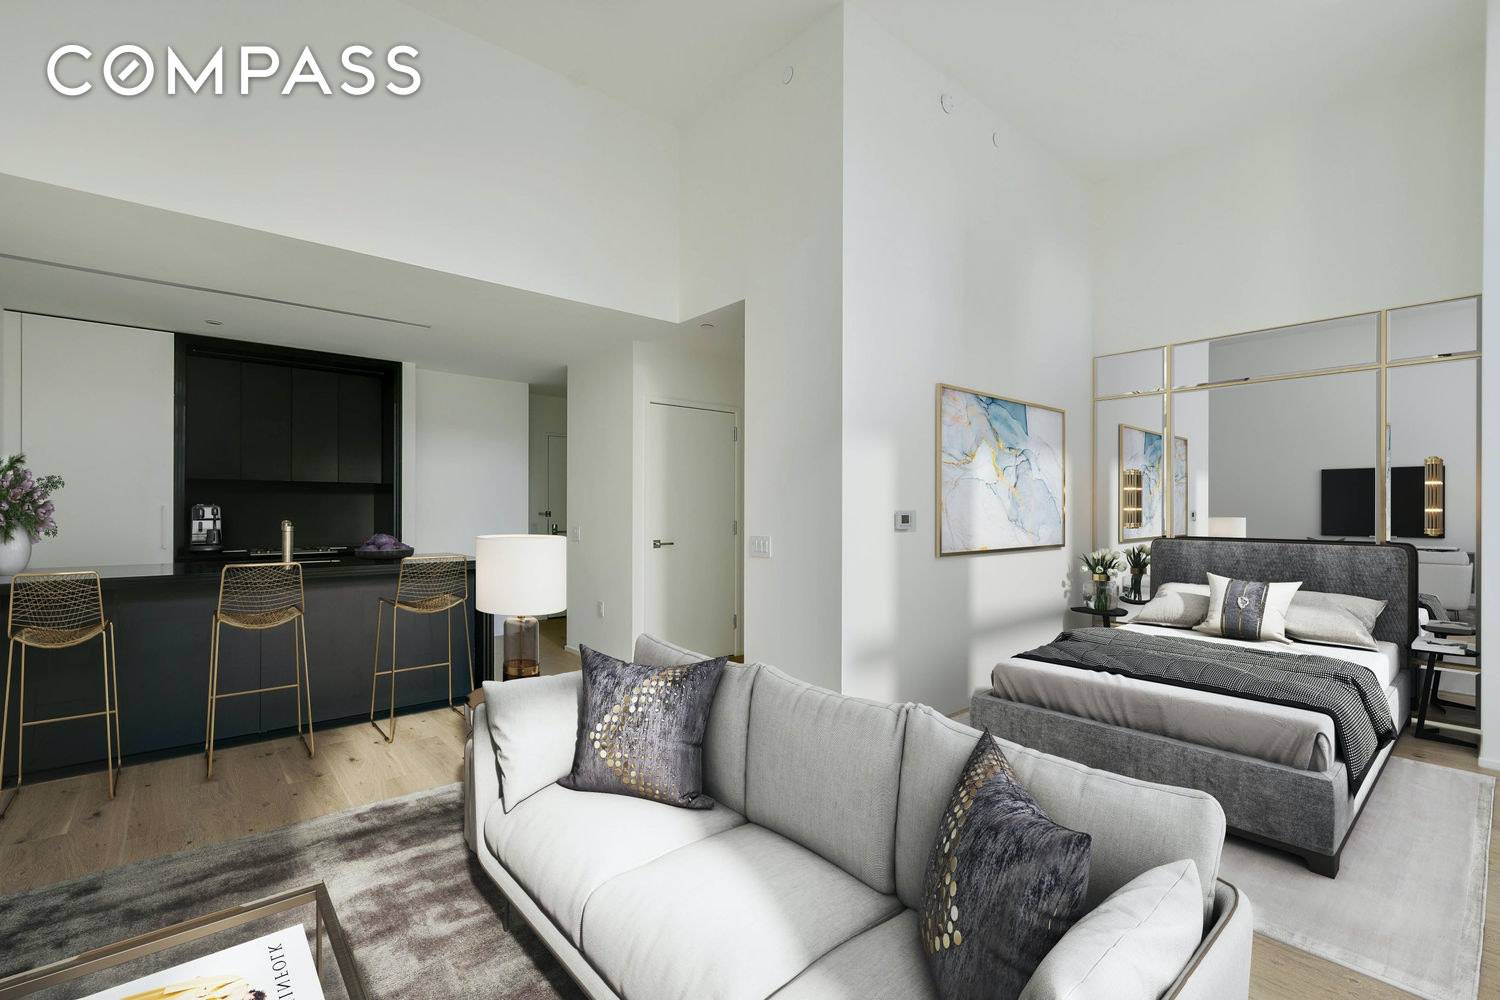 121 East 22nd Street is a new development designed by world renowned architectural firm, OMA.